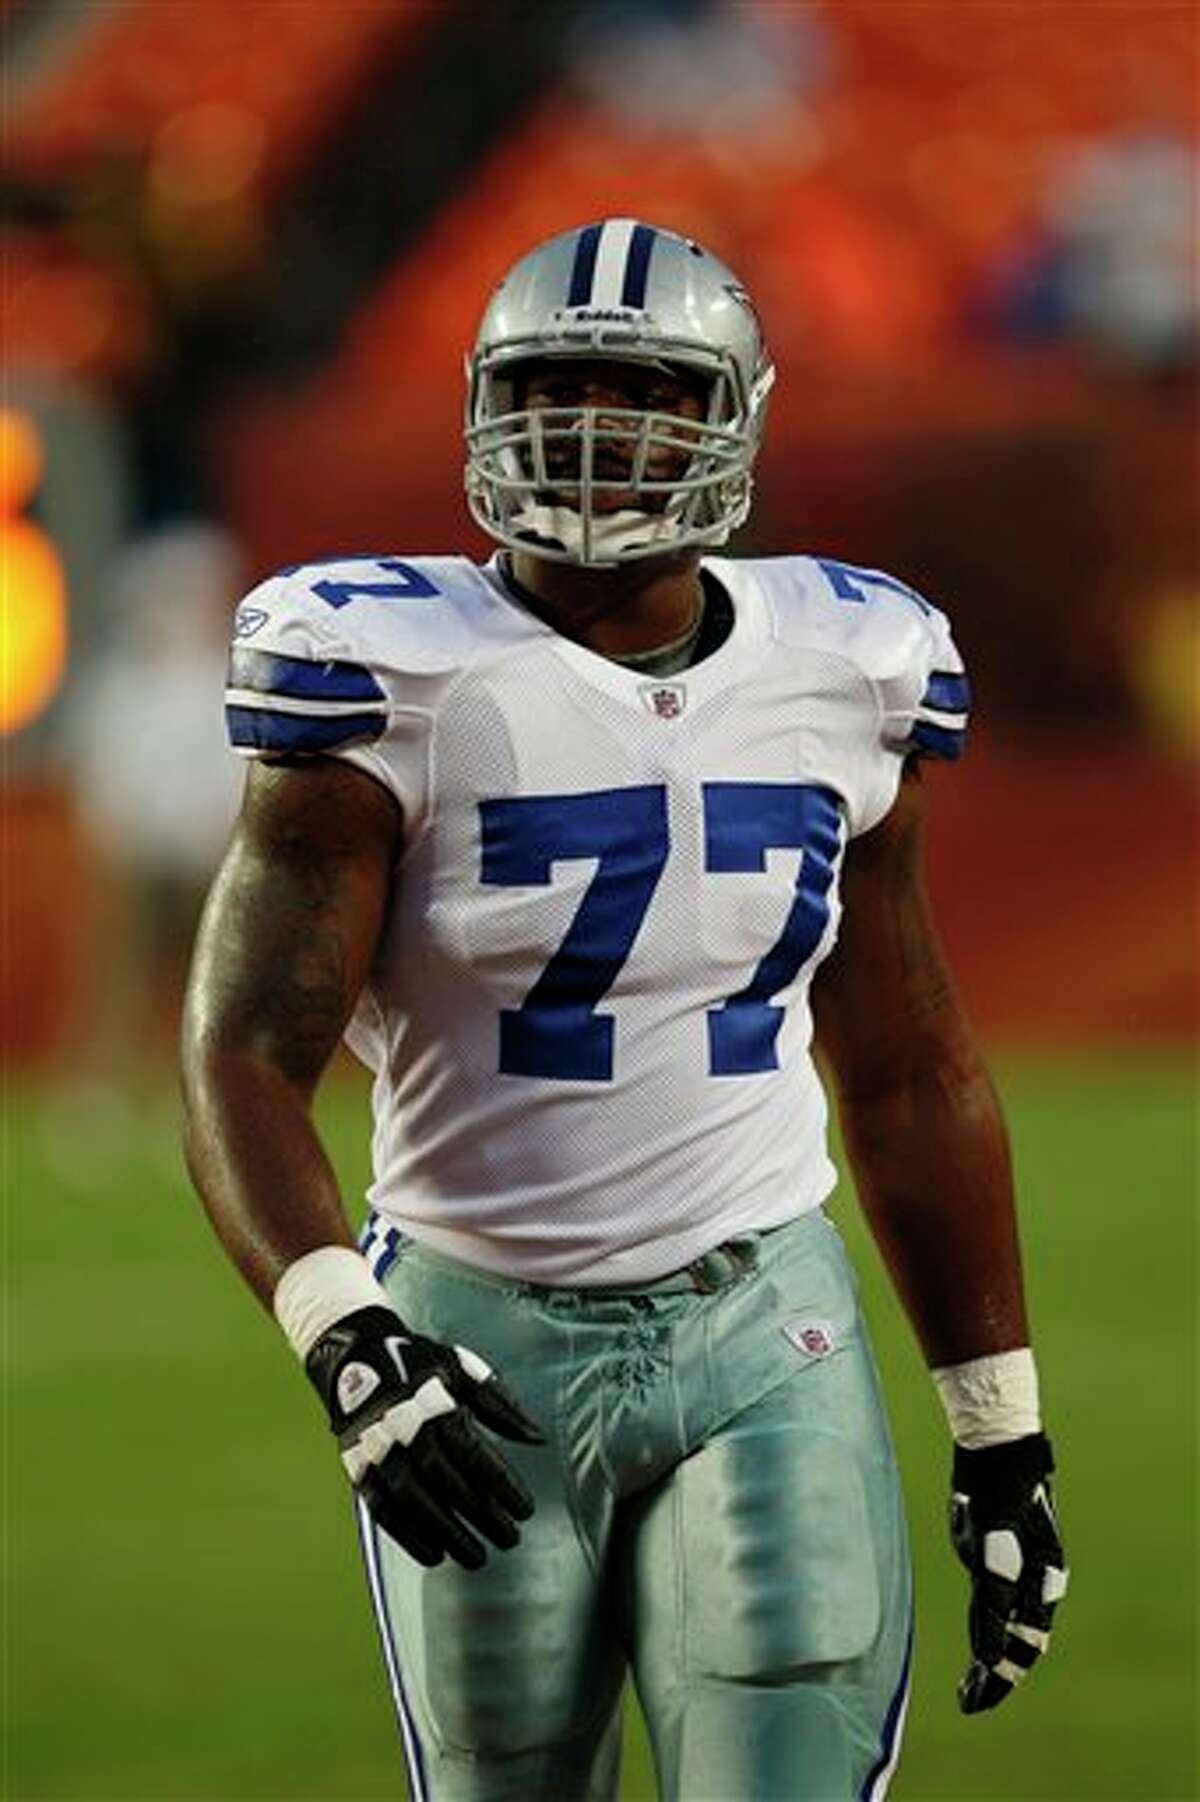 Dallas Cowboys tackle Tyron Smith (77) warms up before the start of an NFL pre season football game against the Miami Dolphins, Thursday, Sept. 1, 2011, in Miami. (AP Photo/Wilfredo Lee)